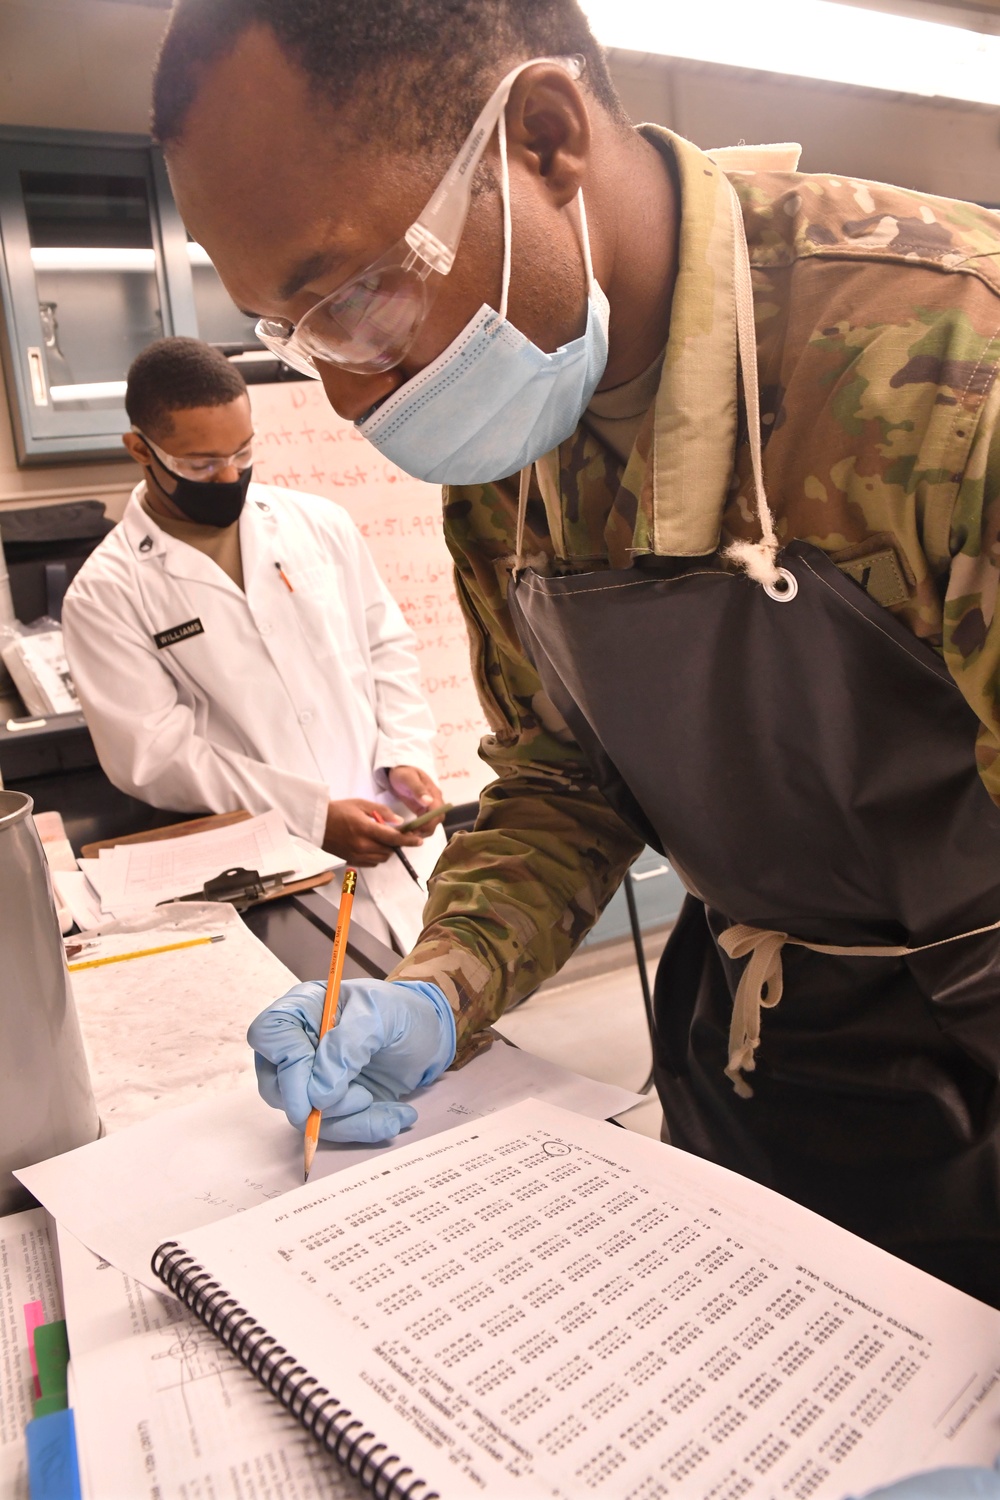 Fuel focus: petroleum lab specialists learn attention to detail, more during training